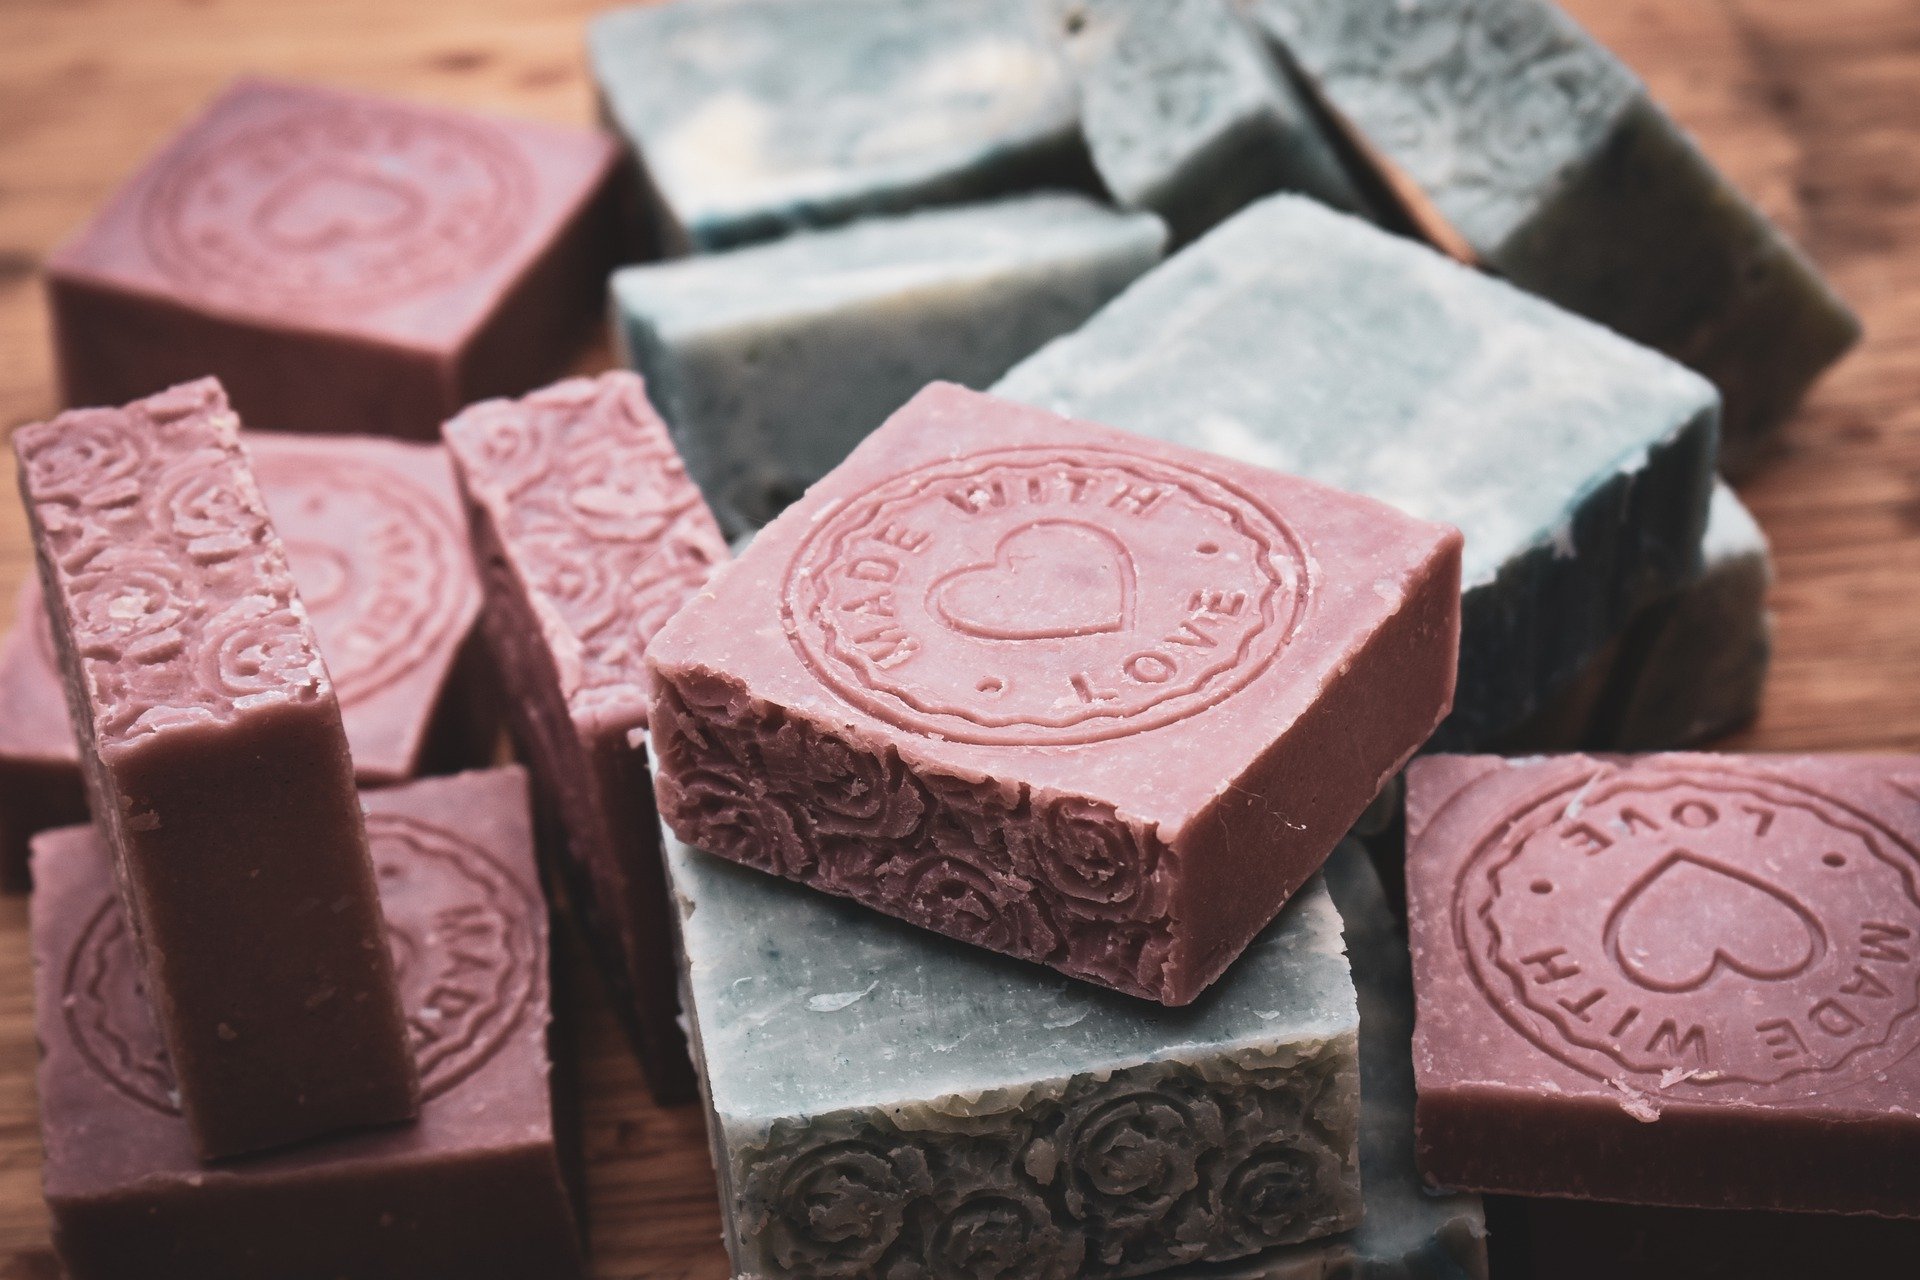 THE ORIGINS OF COLD PRESS SOAP MAKING